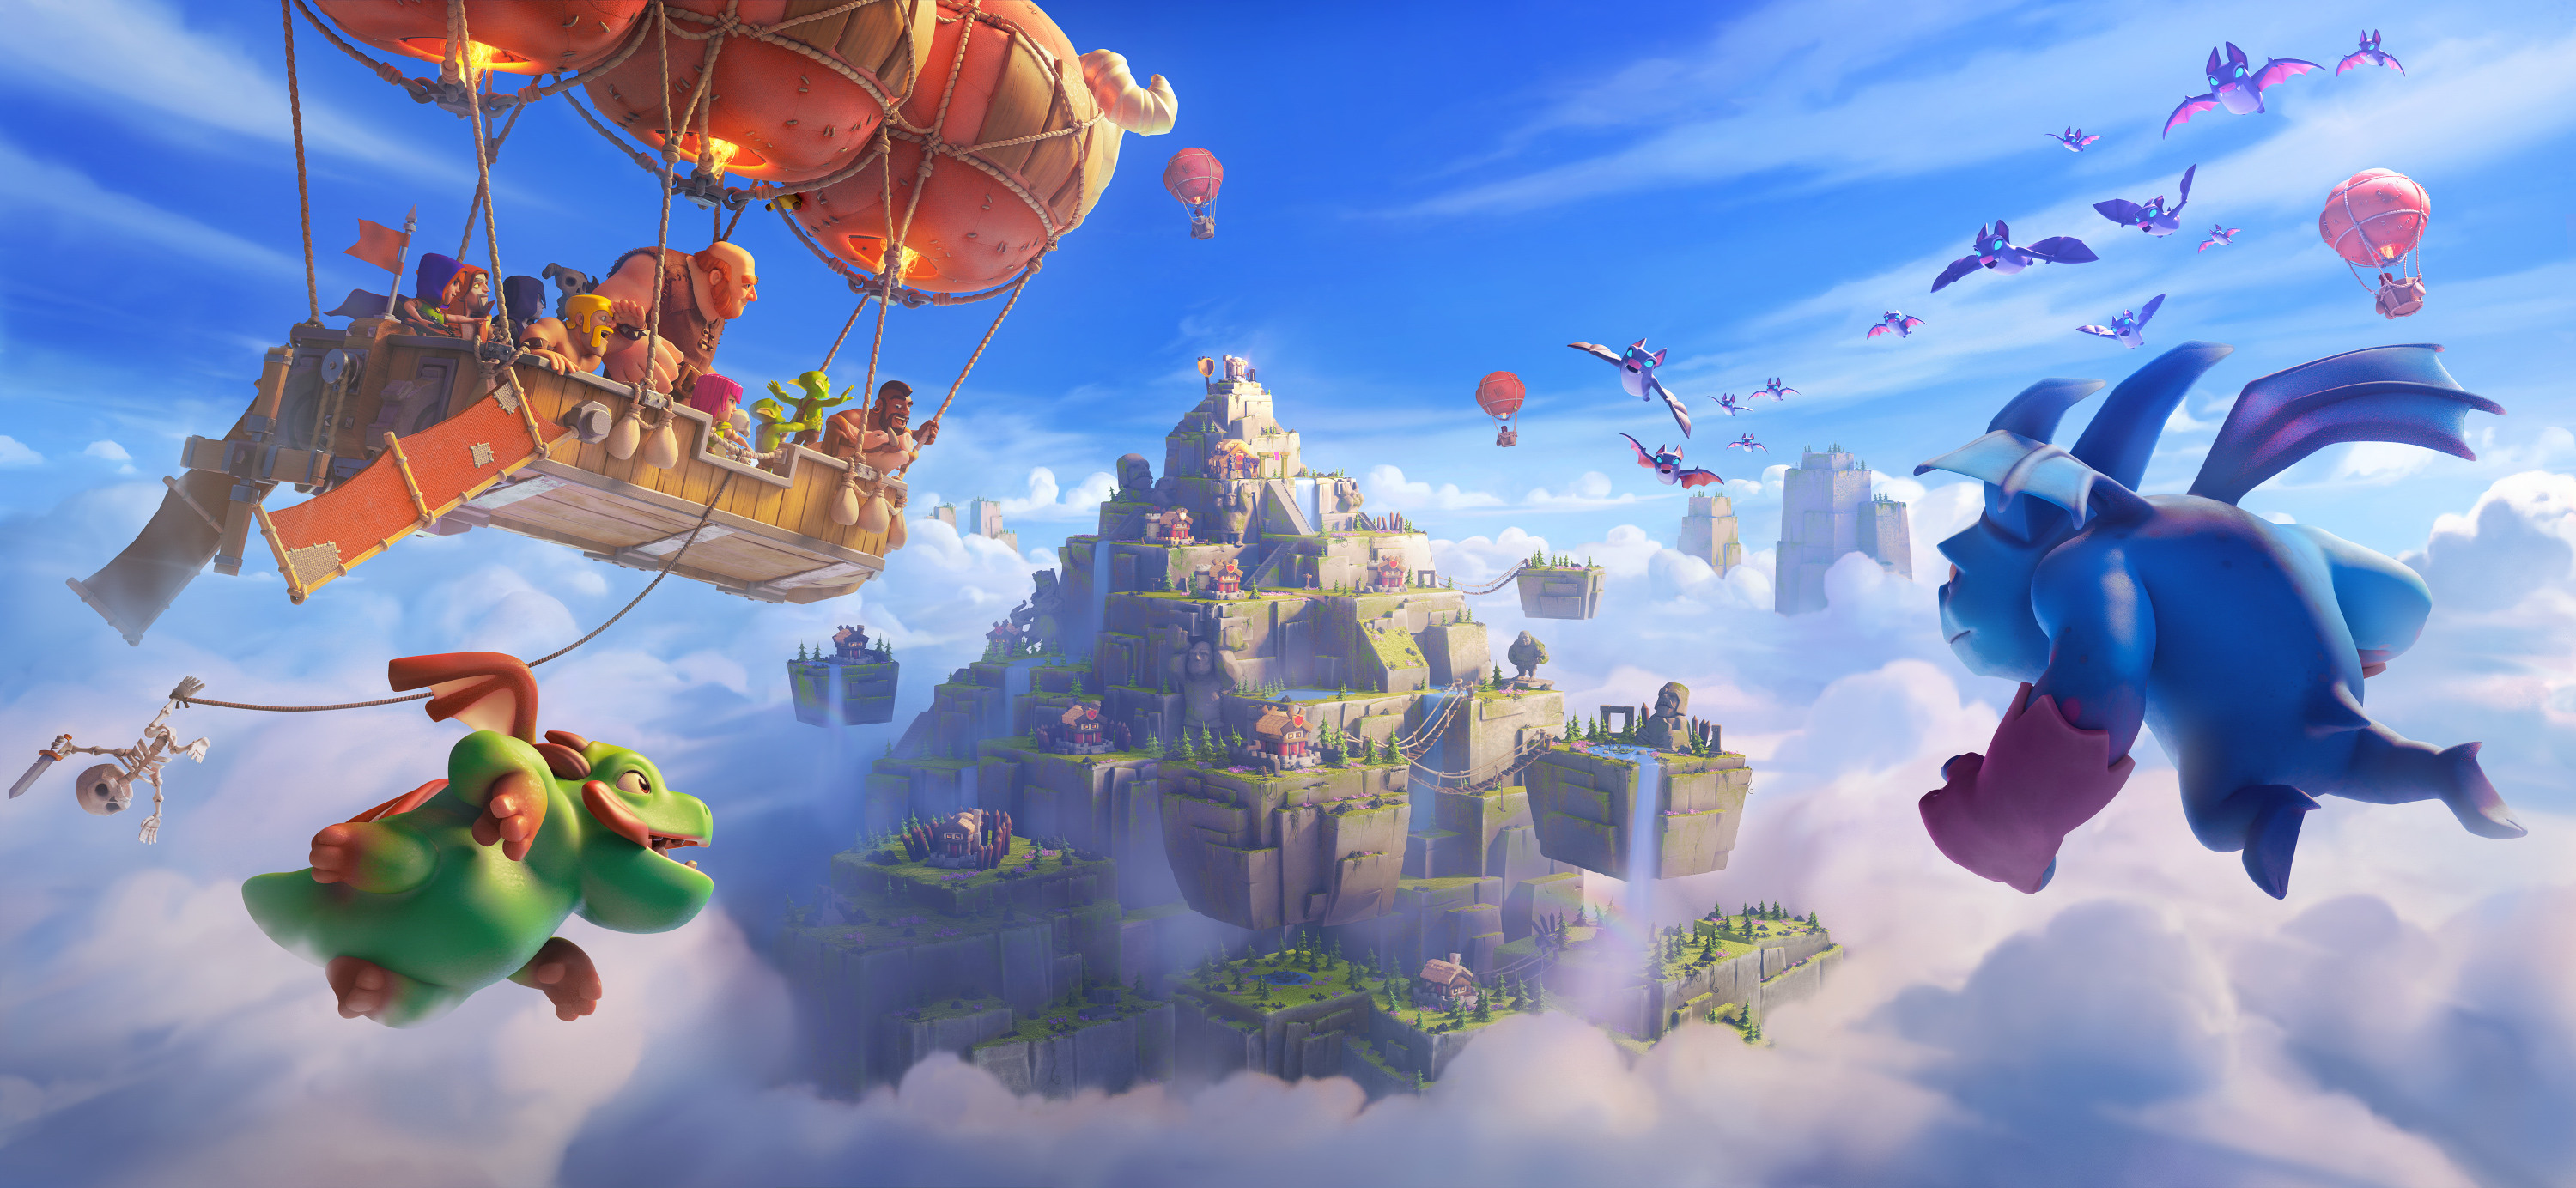 Clash Of Clans Loading Screen Video Game Art Clouds Dragon Video Games Video Game Characters Sky Hot 3000x1384